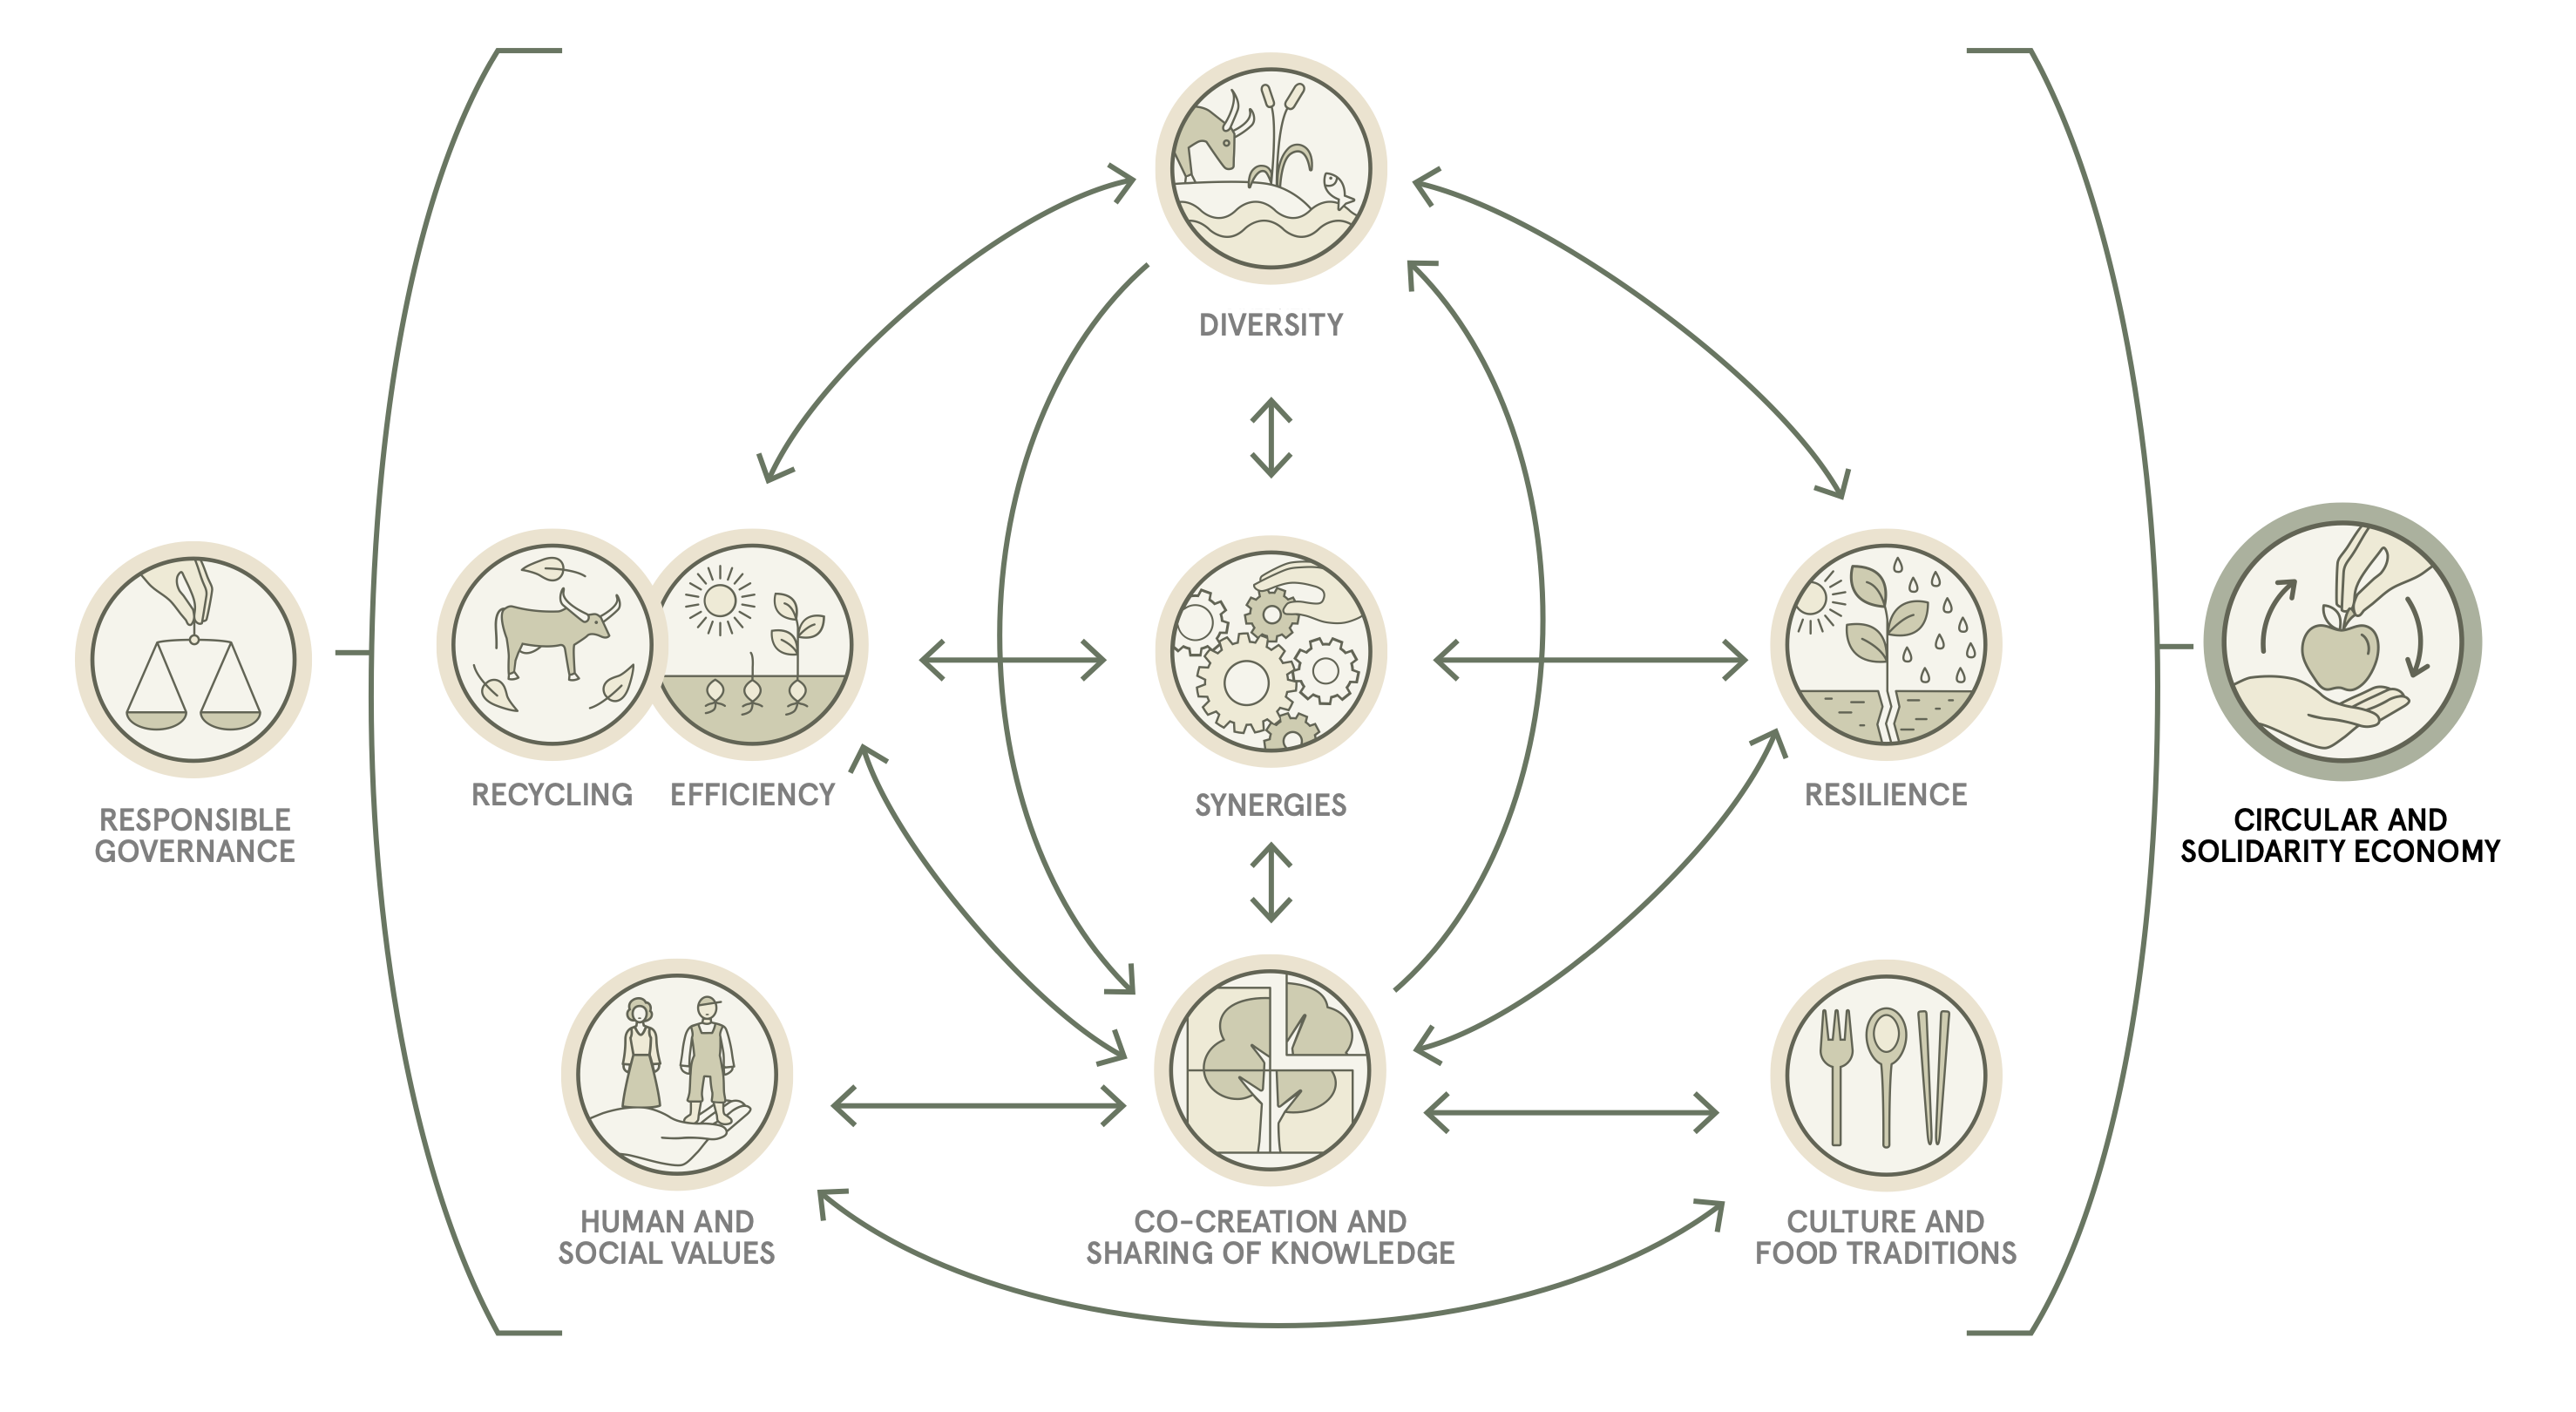 A diagram depicting the relationships between difference aspects of Agroecology such as co-creation & sharing of knowledge, diversity, and resilience, reproduced from FAO (2018)1